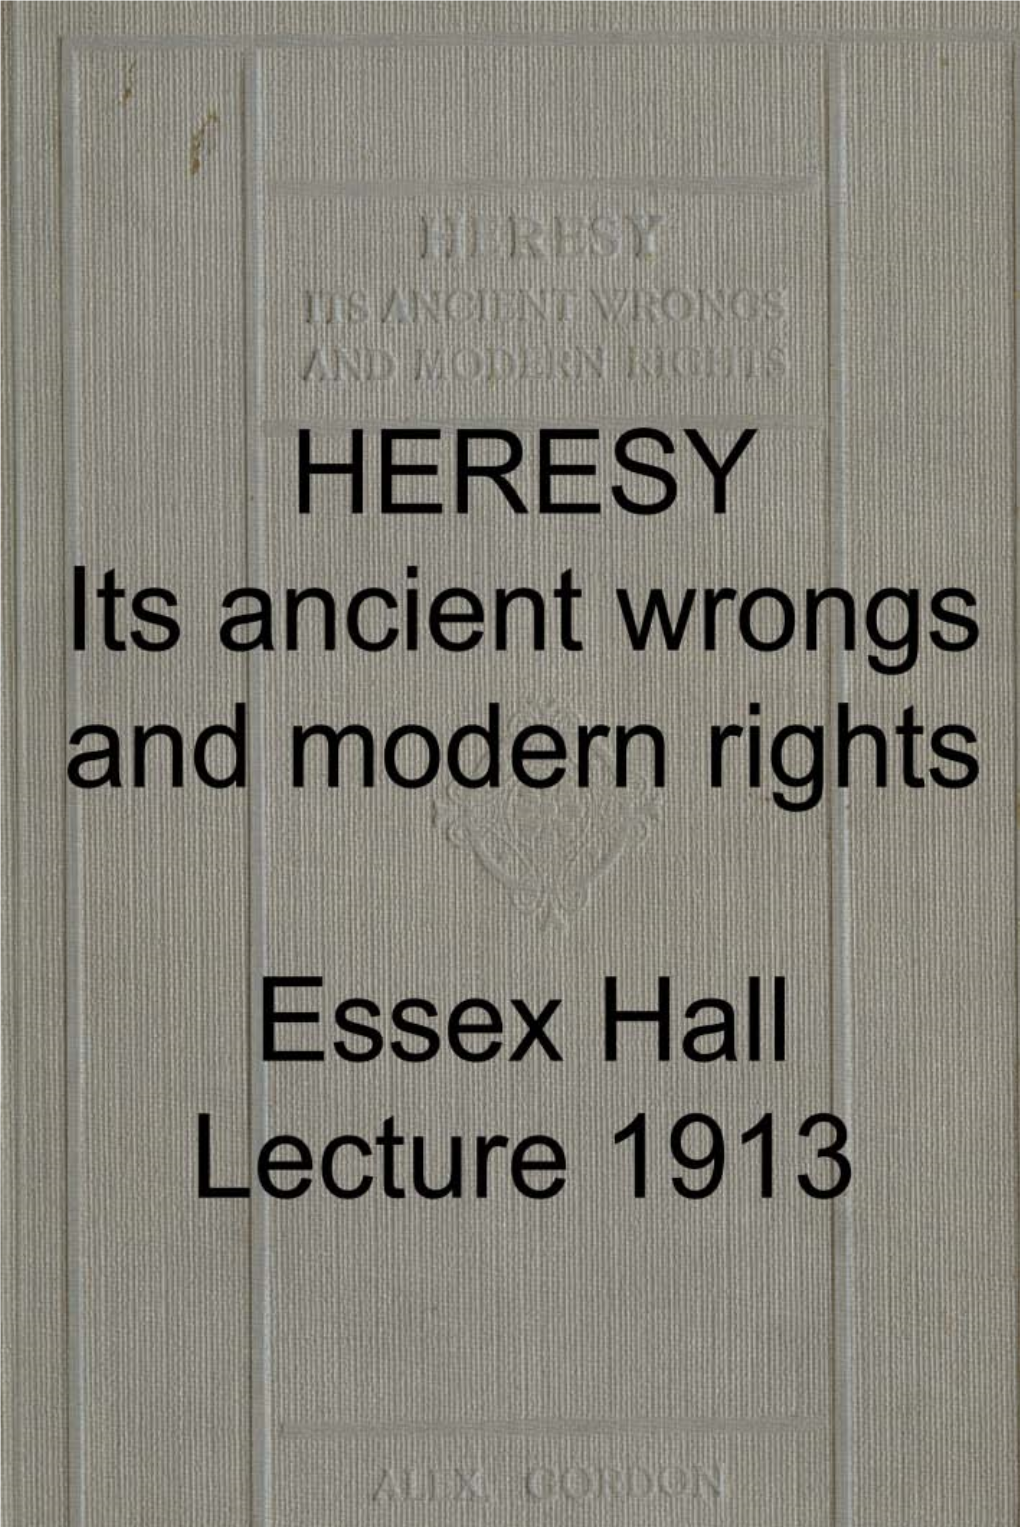 Essex Hall Lecture 1913